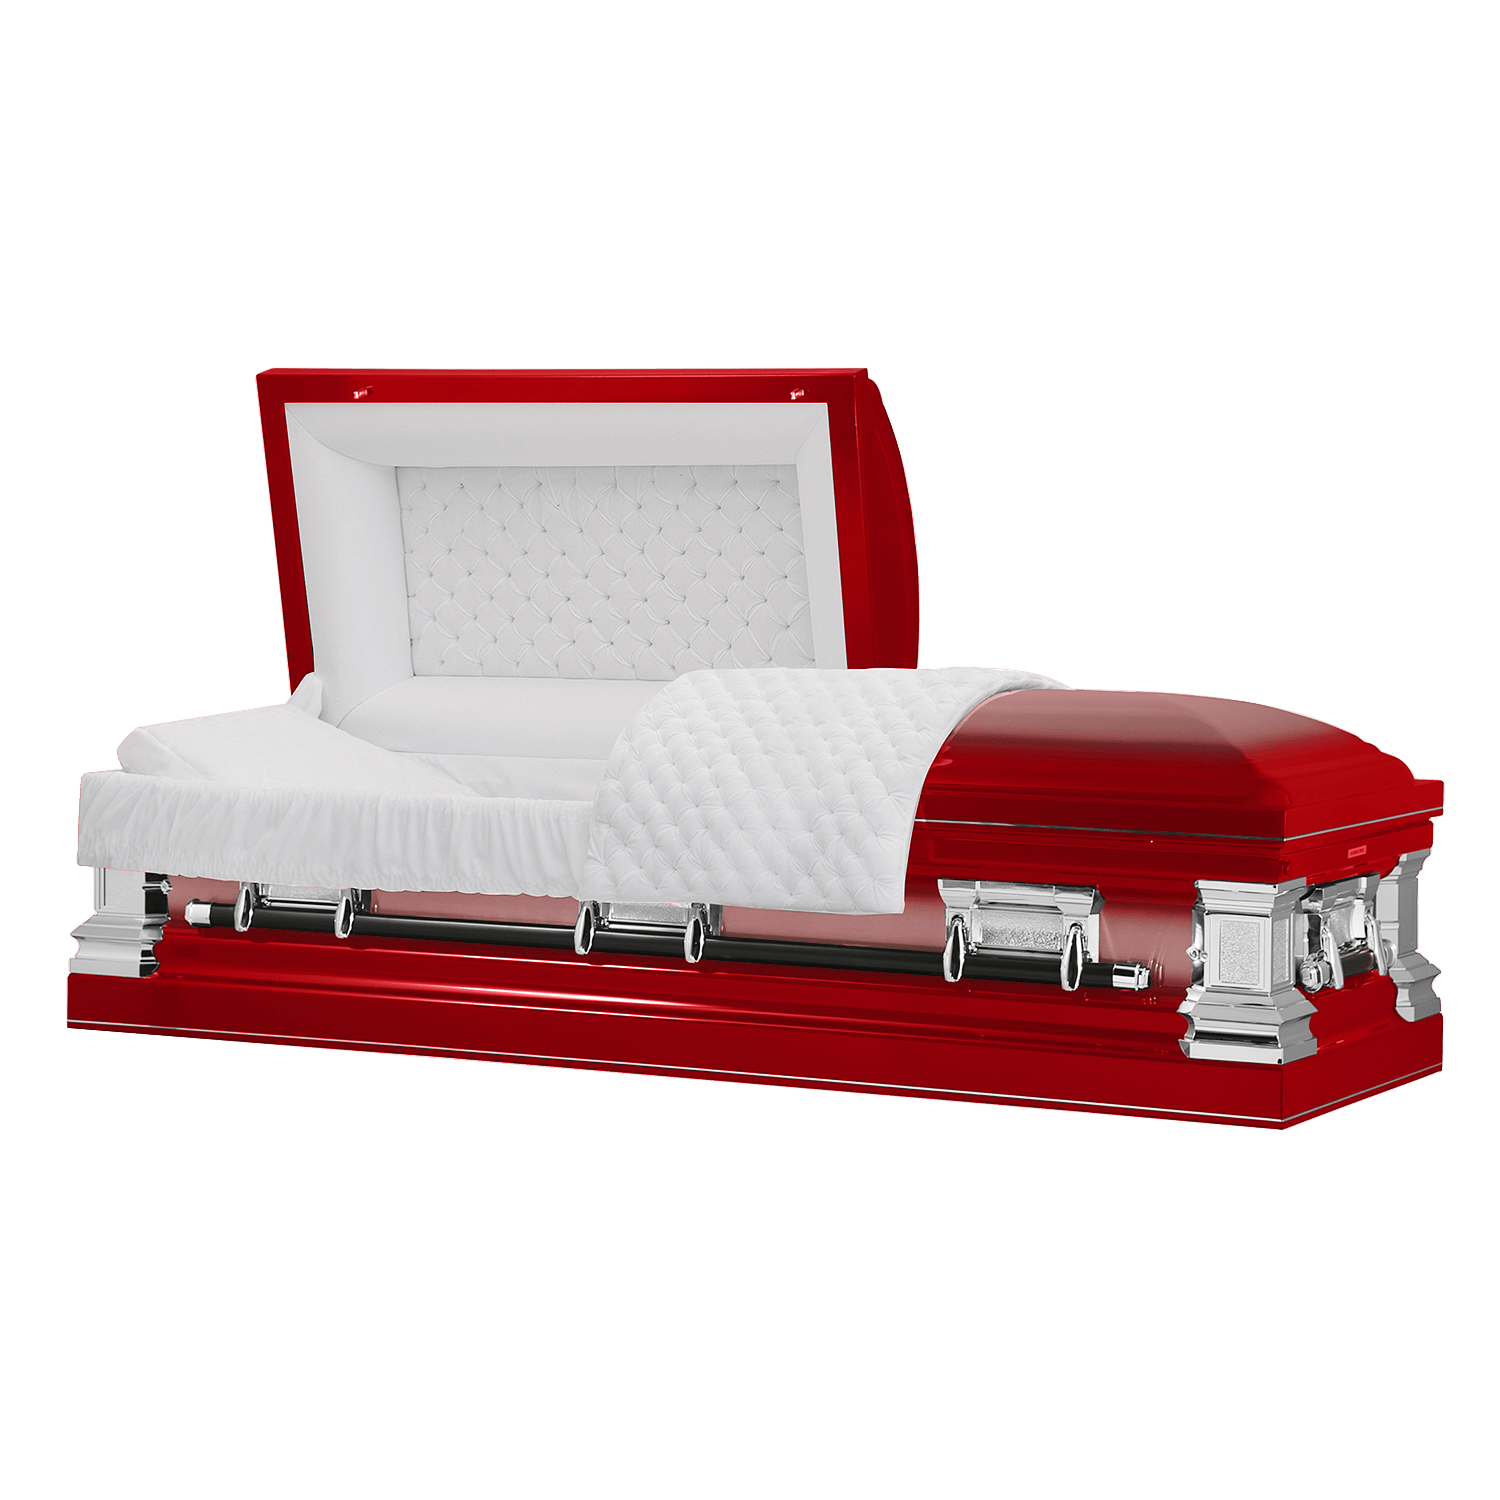 Load image into Gallery viewer, Era Series | Red Stainless Steel Casket with White Interior - Titan Casket
